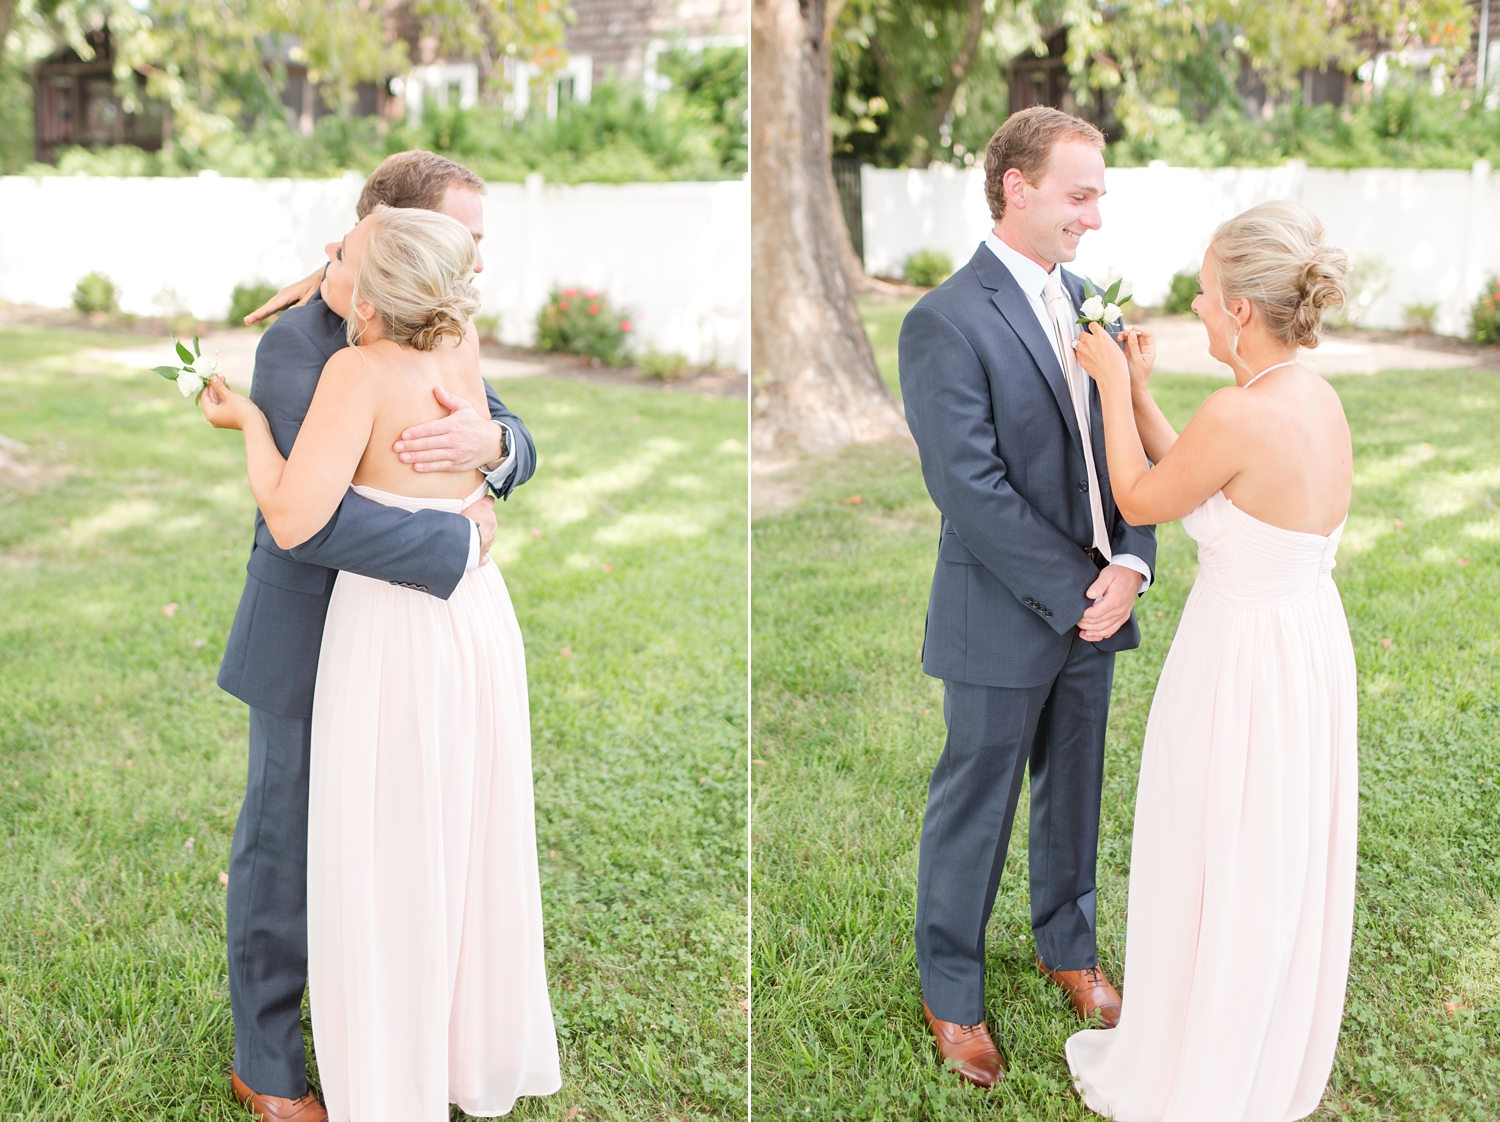  Tommy's twin sister helped him put on the boutonnière. Such a special moment! 